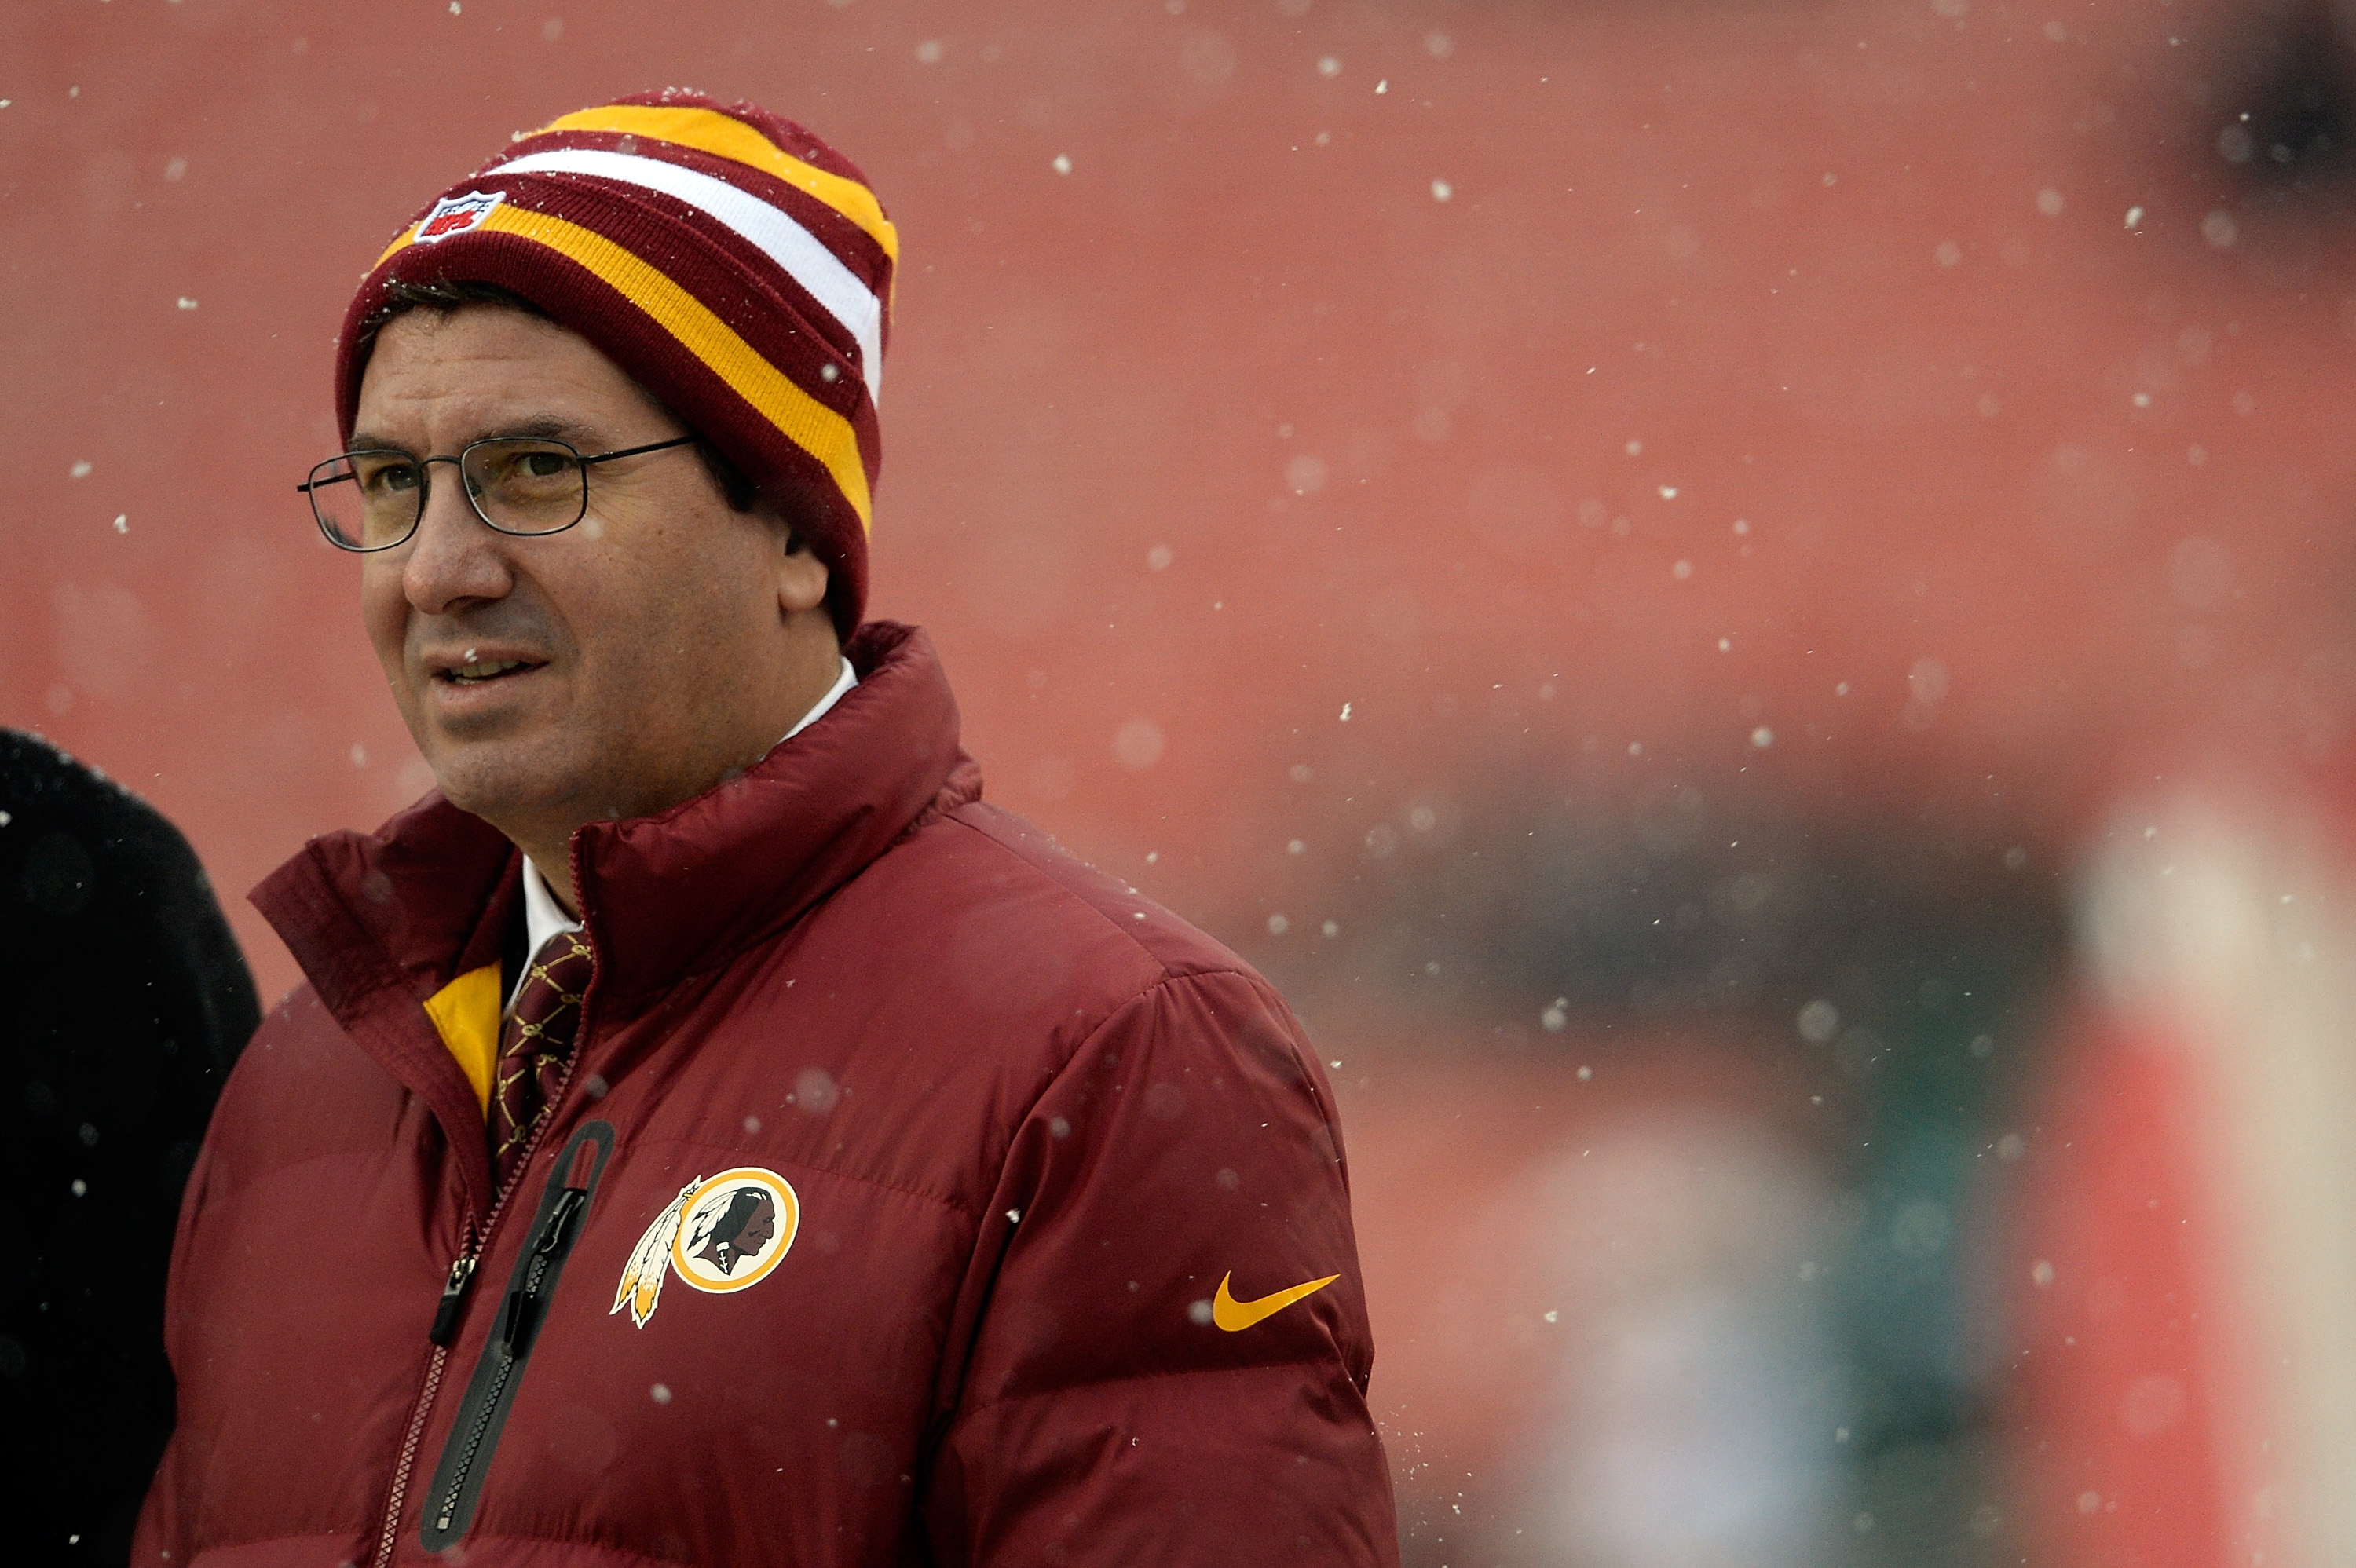 Washington Redskins owner Daniel Snyder watches warmups before an NFL game between the Kansas City Chiefs and Washington Redskins at FedExField on December 8, 2013 in Landover, Maryland. (Patrick McDermott--Getty Images)